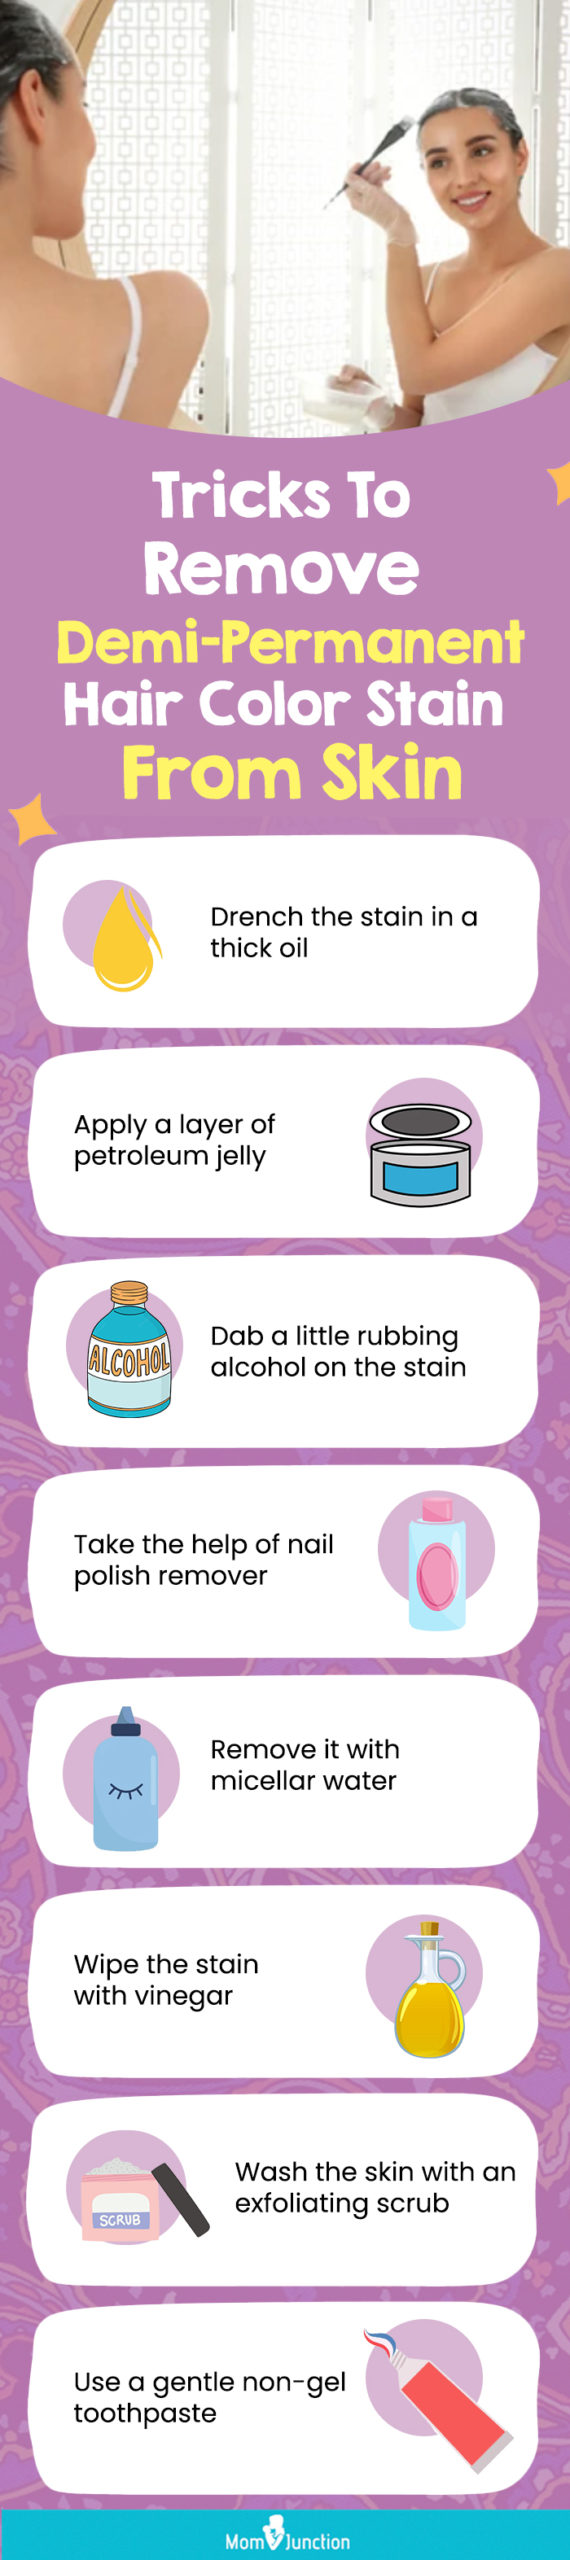 Tricks To Remove Demi Permanent Hair Color Stain From Skin (infographic)